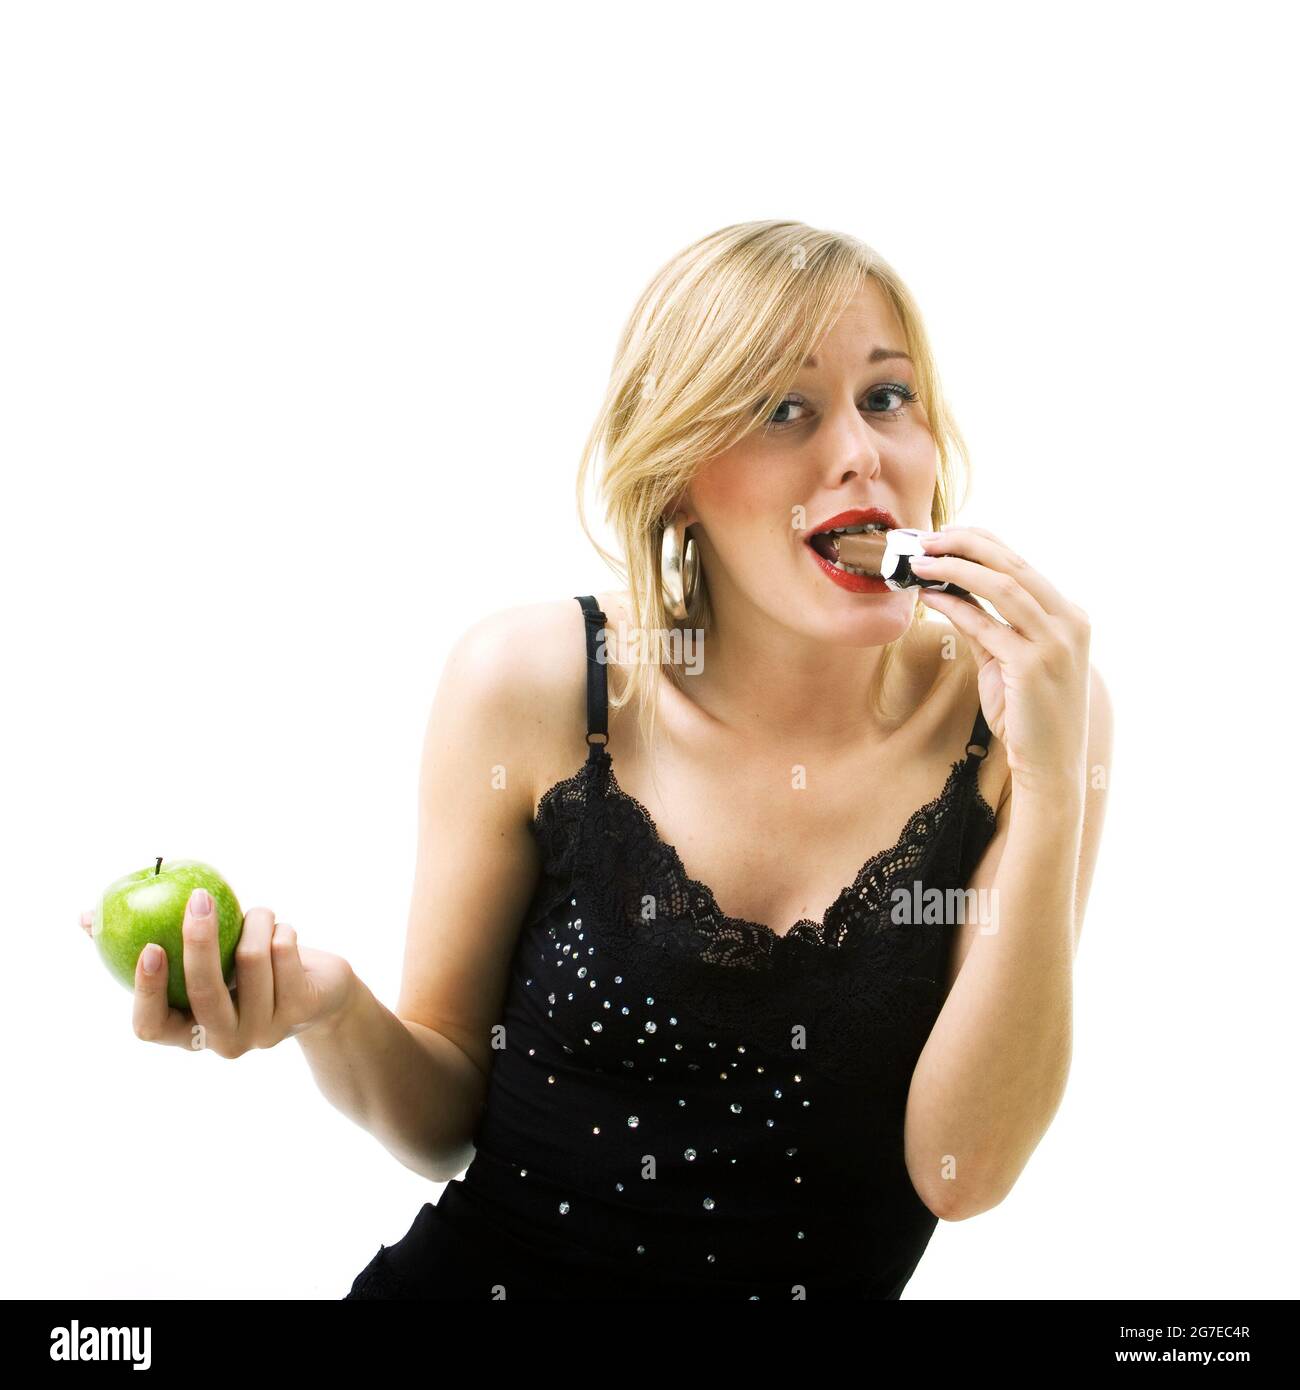 Food and healthy nutrition - Woman eating candy instead of apple Stock Photo